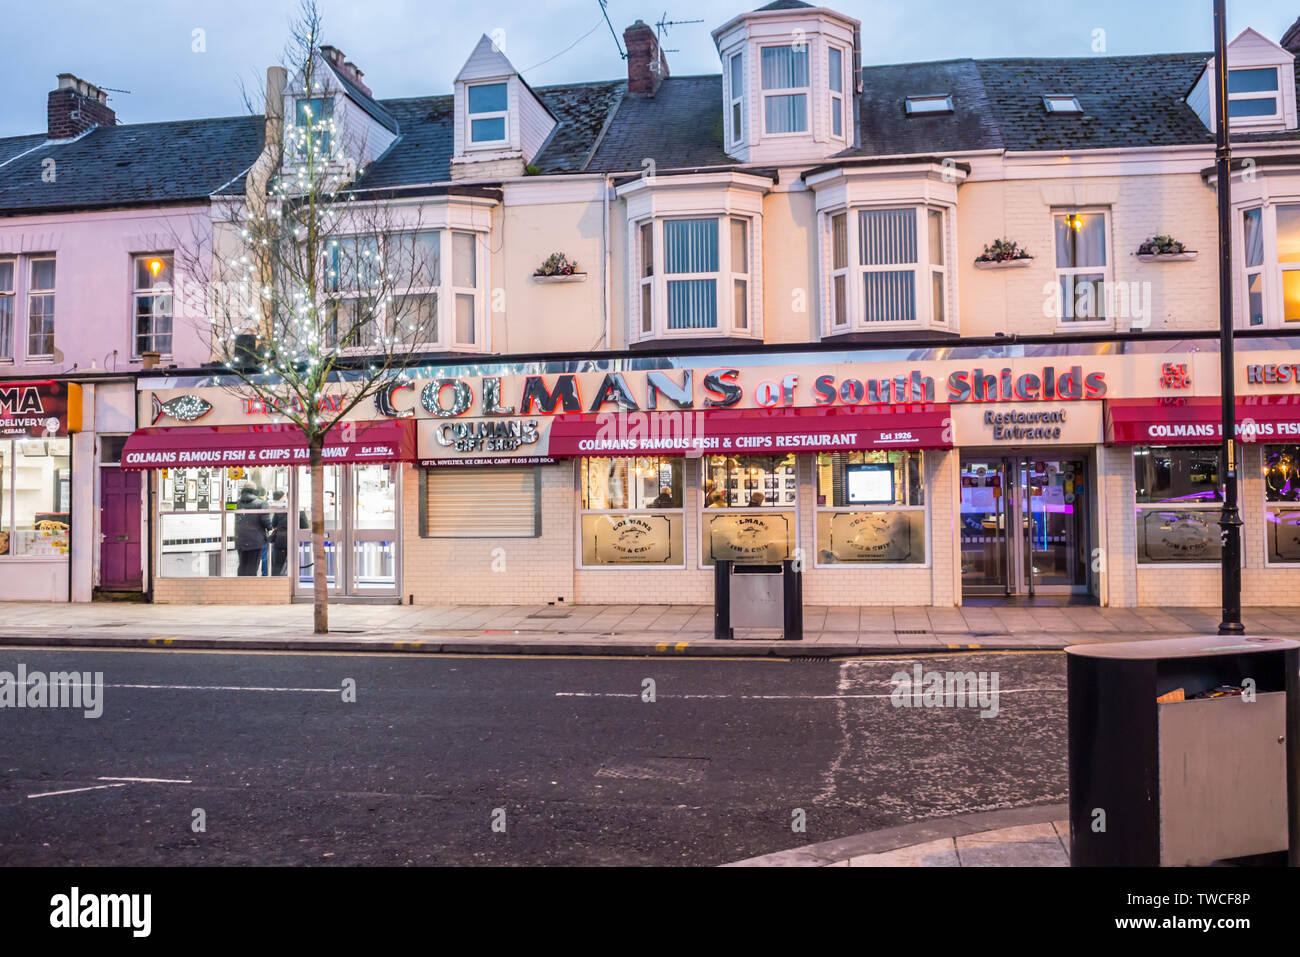 Colman's Fish & Chips Restaurant and Take-Away, South Shields Stock Photo